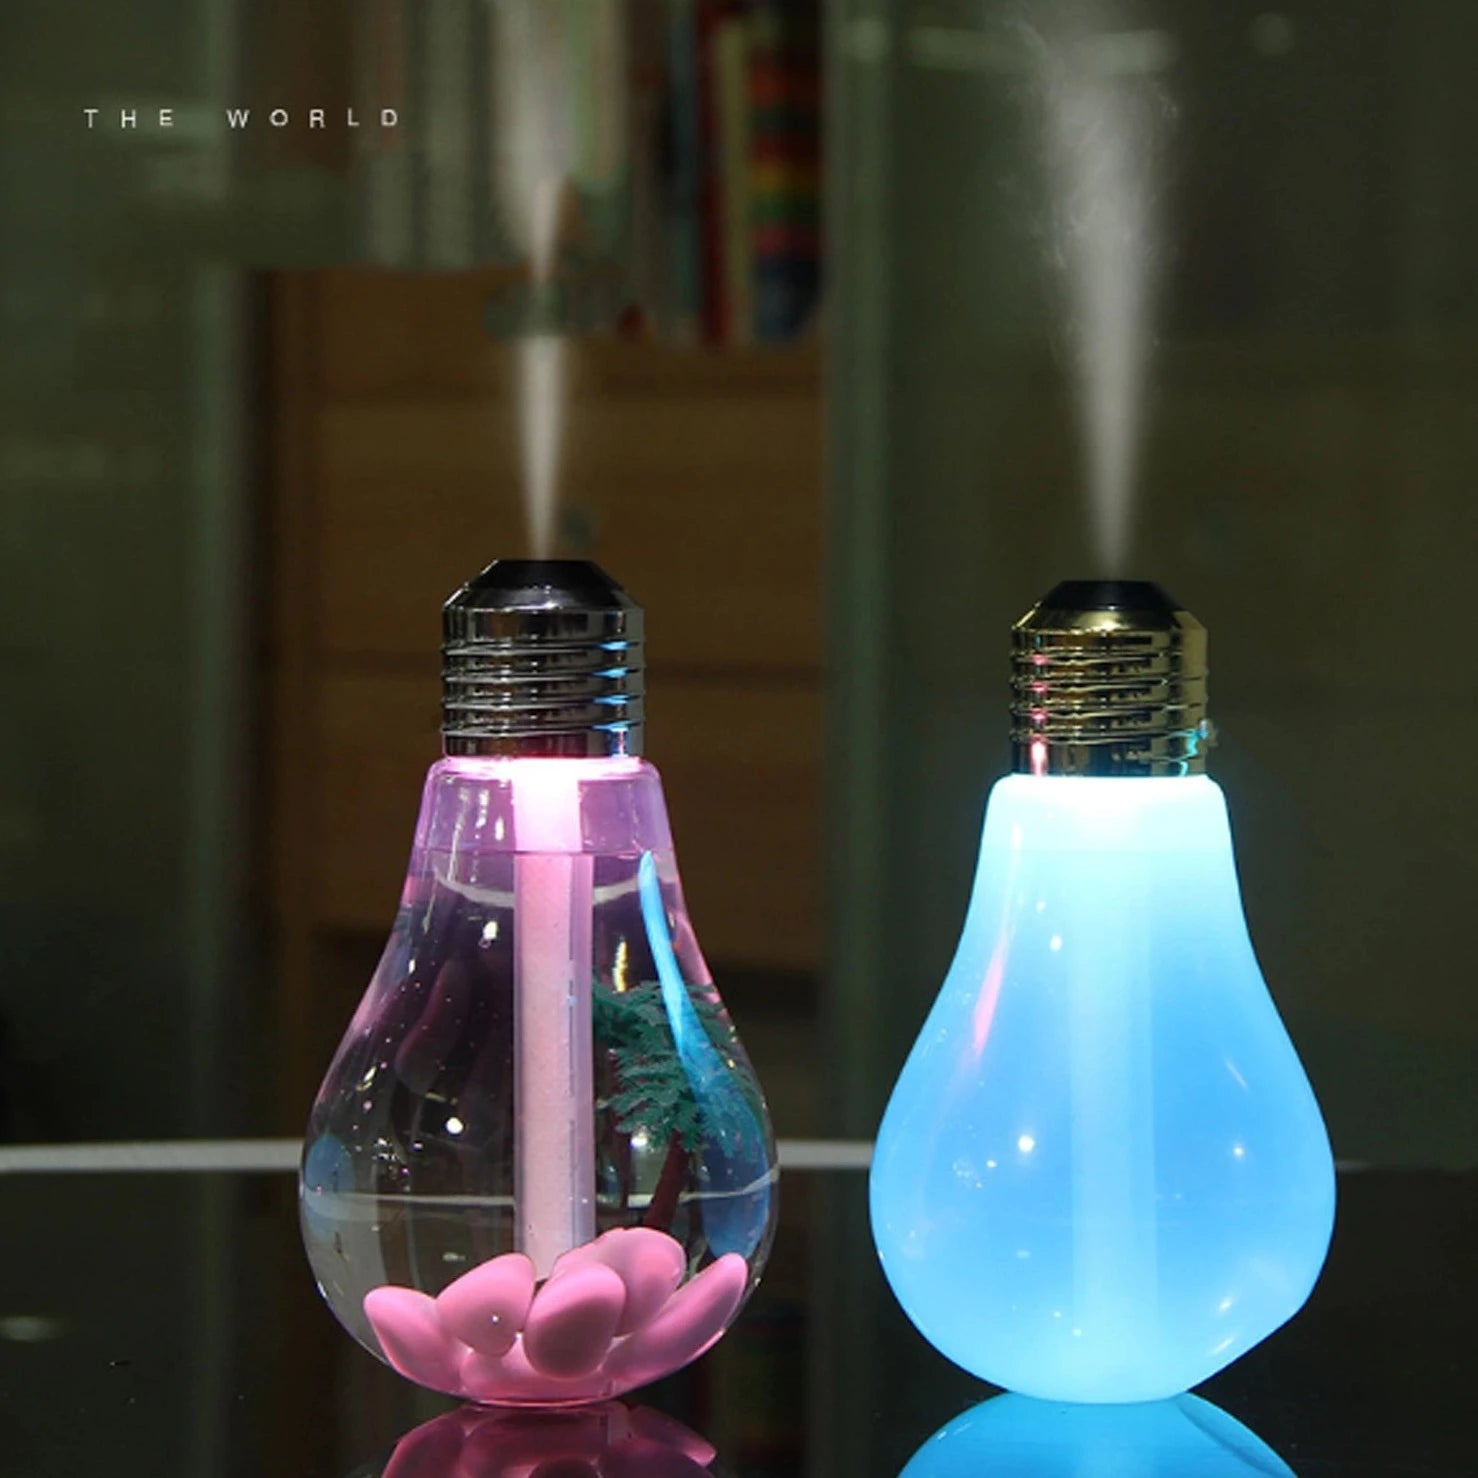 Moon Lamp Cool Mist Humidifier for Bedroom, 3-in-1 India